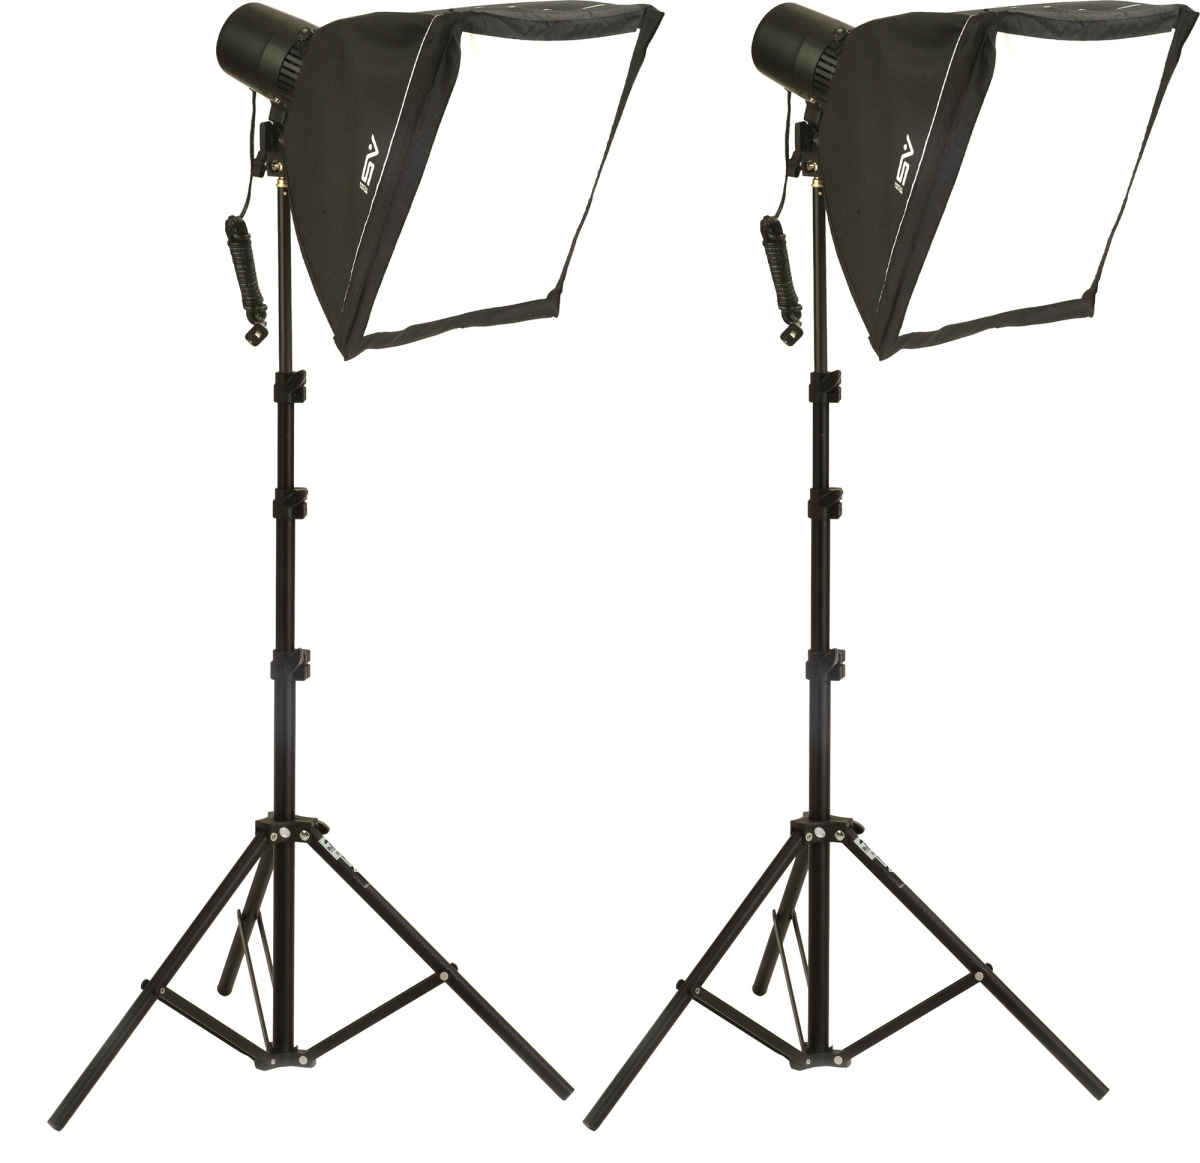 Picture of Smith-Victor SV-408080 Professional Video Lighting SoftBox Kit